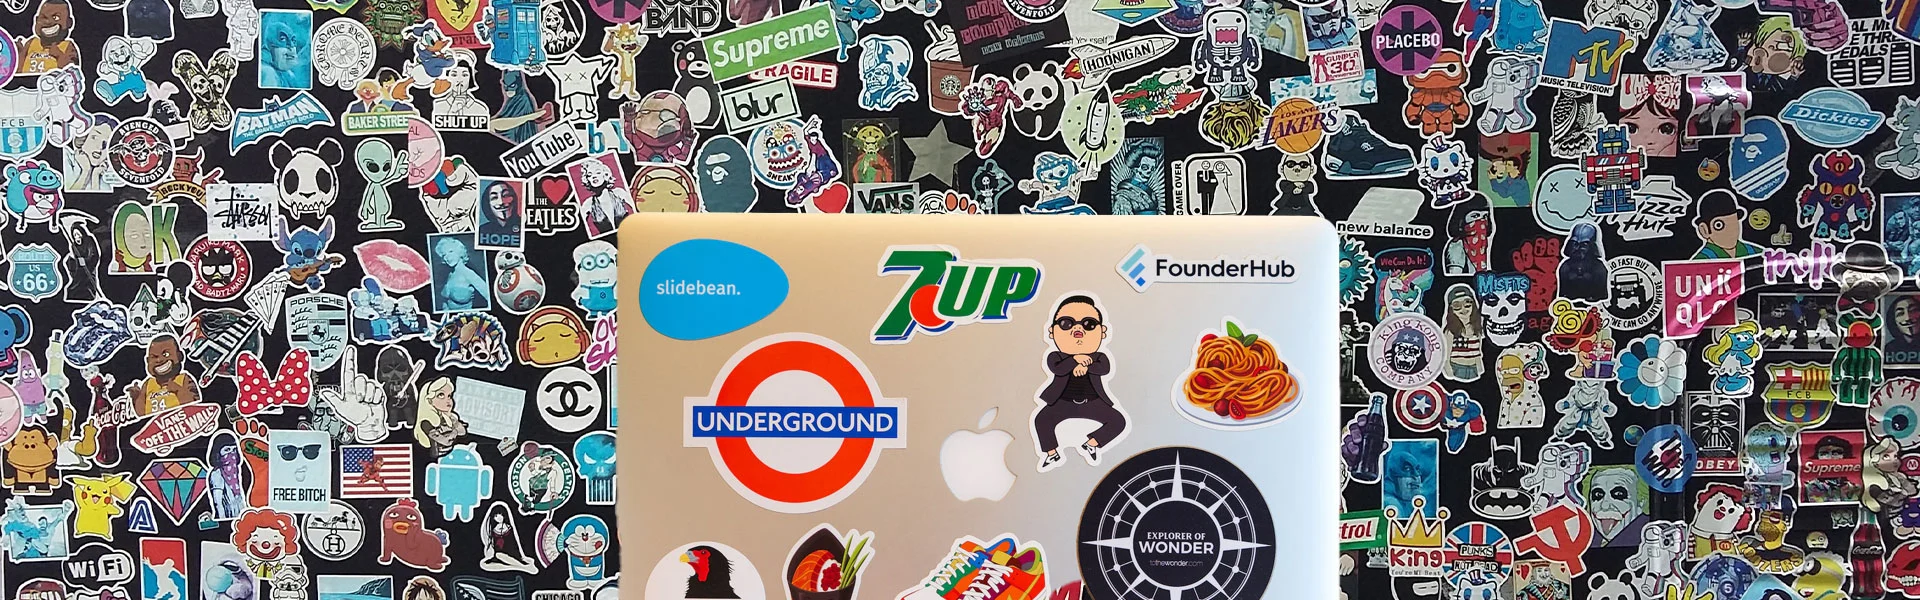 Best Photo Stickers for Creative Personalization | Your Ultimate Guide